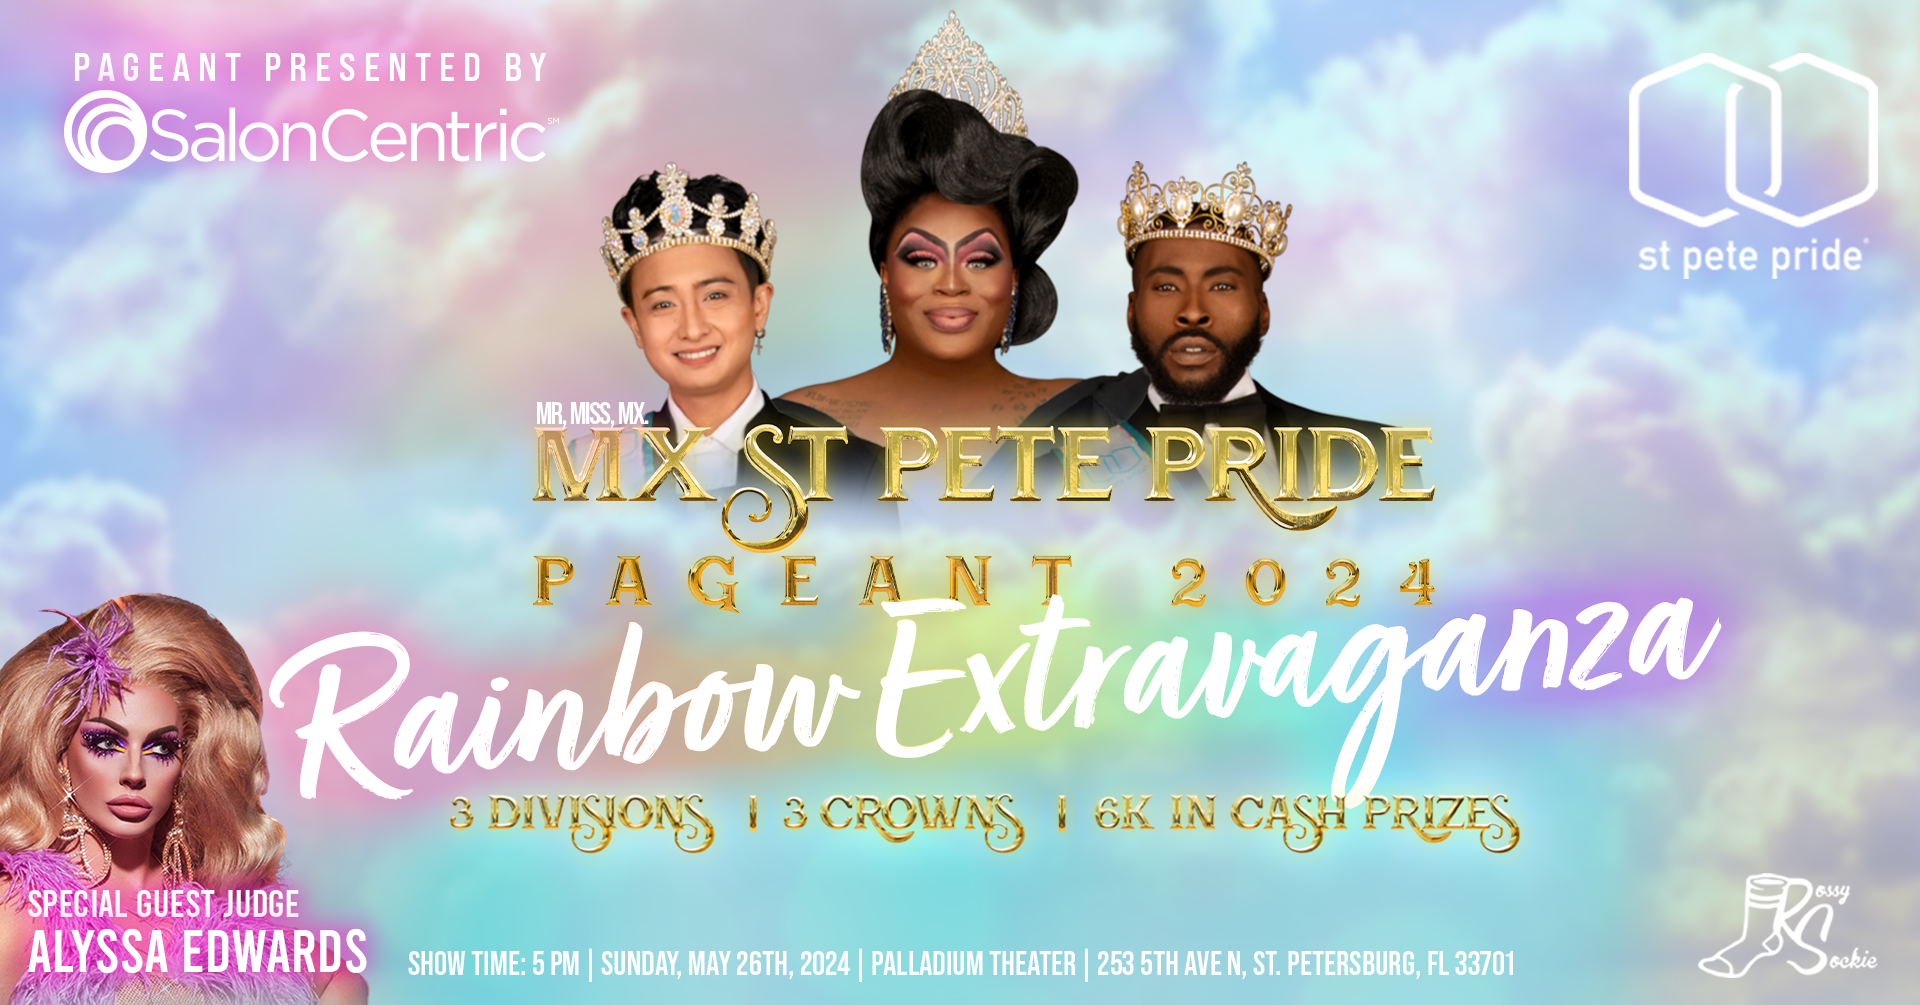 Mx. St Pete Pride Pageant 2024 presented by Salon Centric